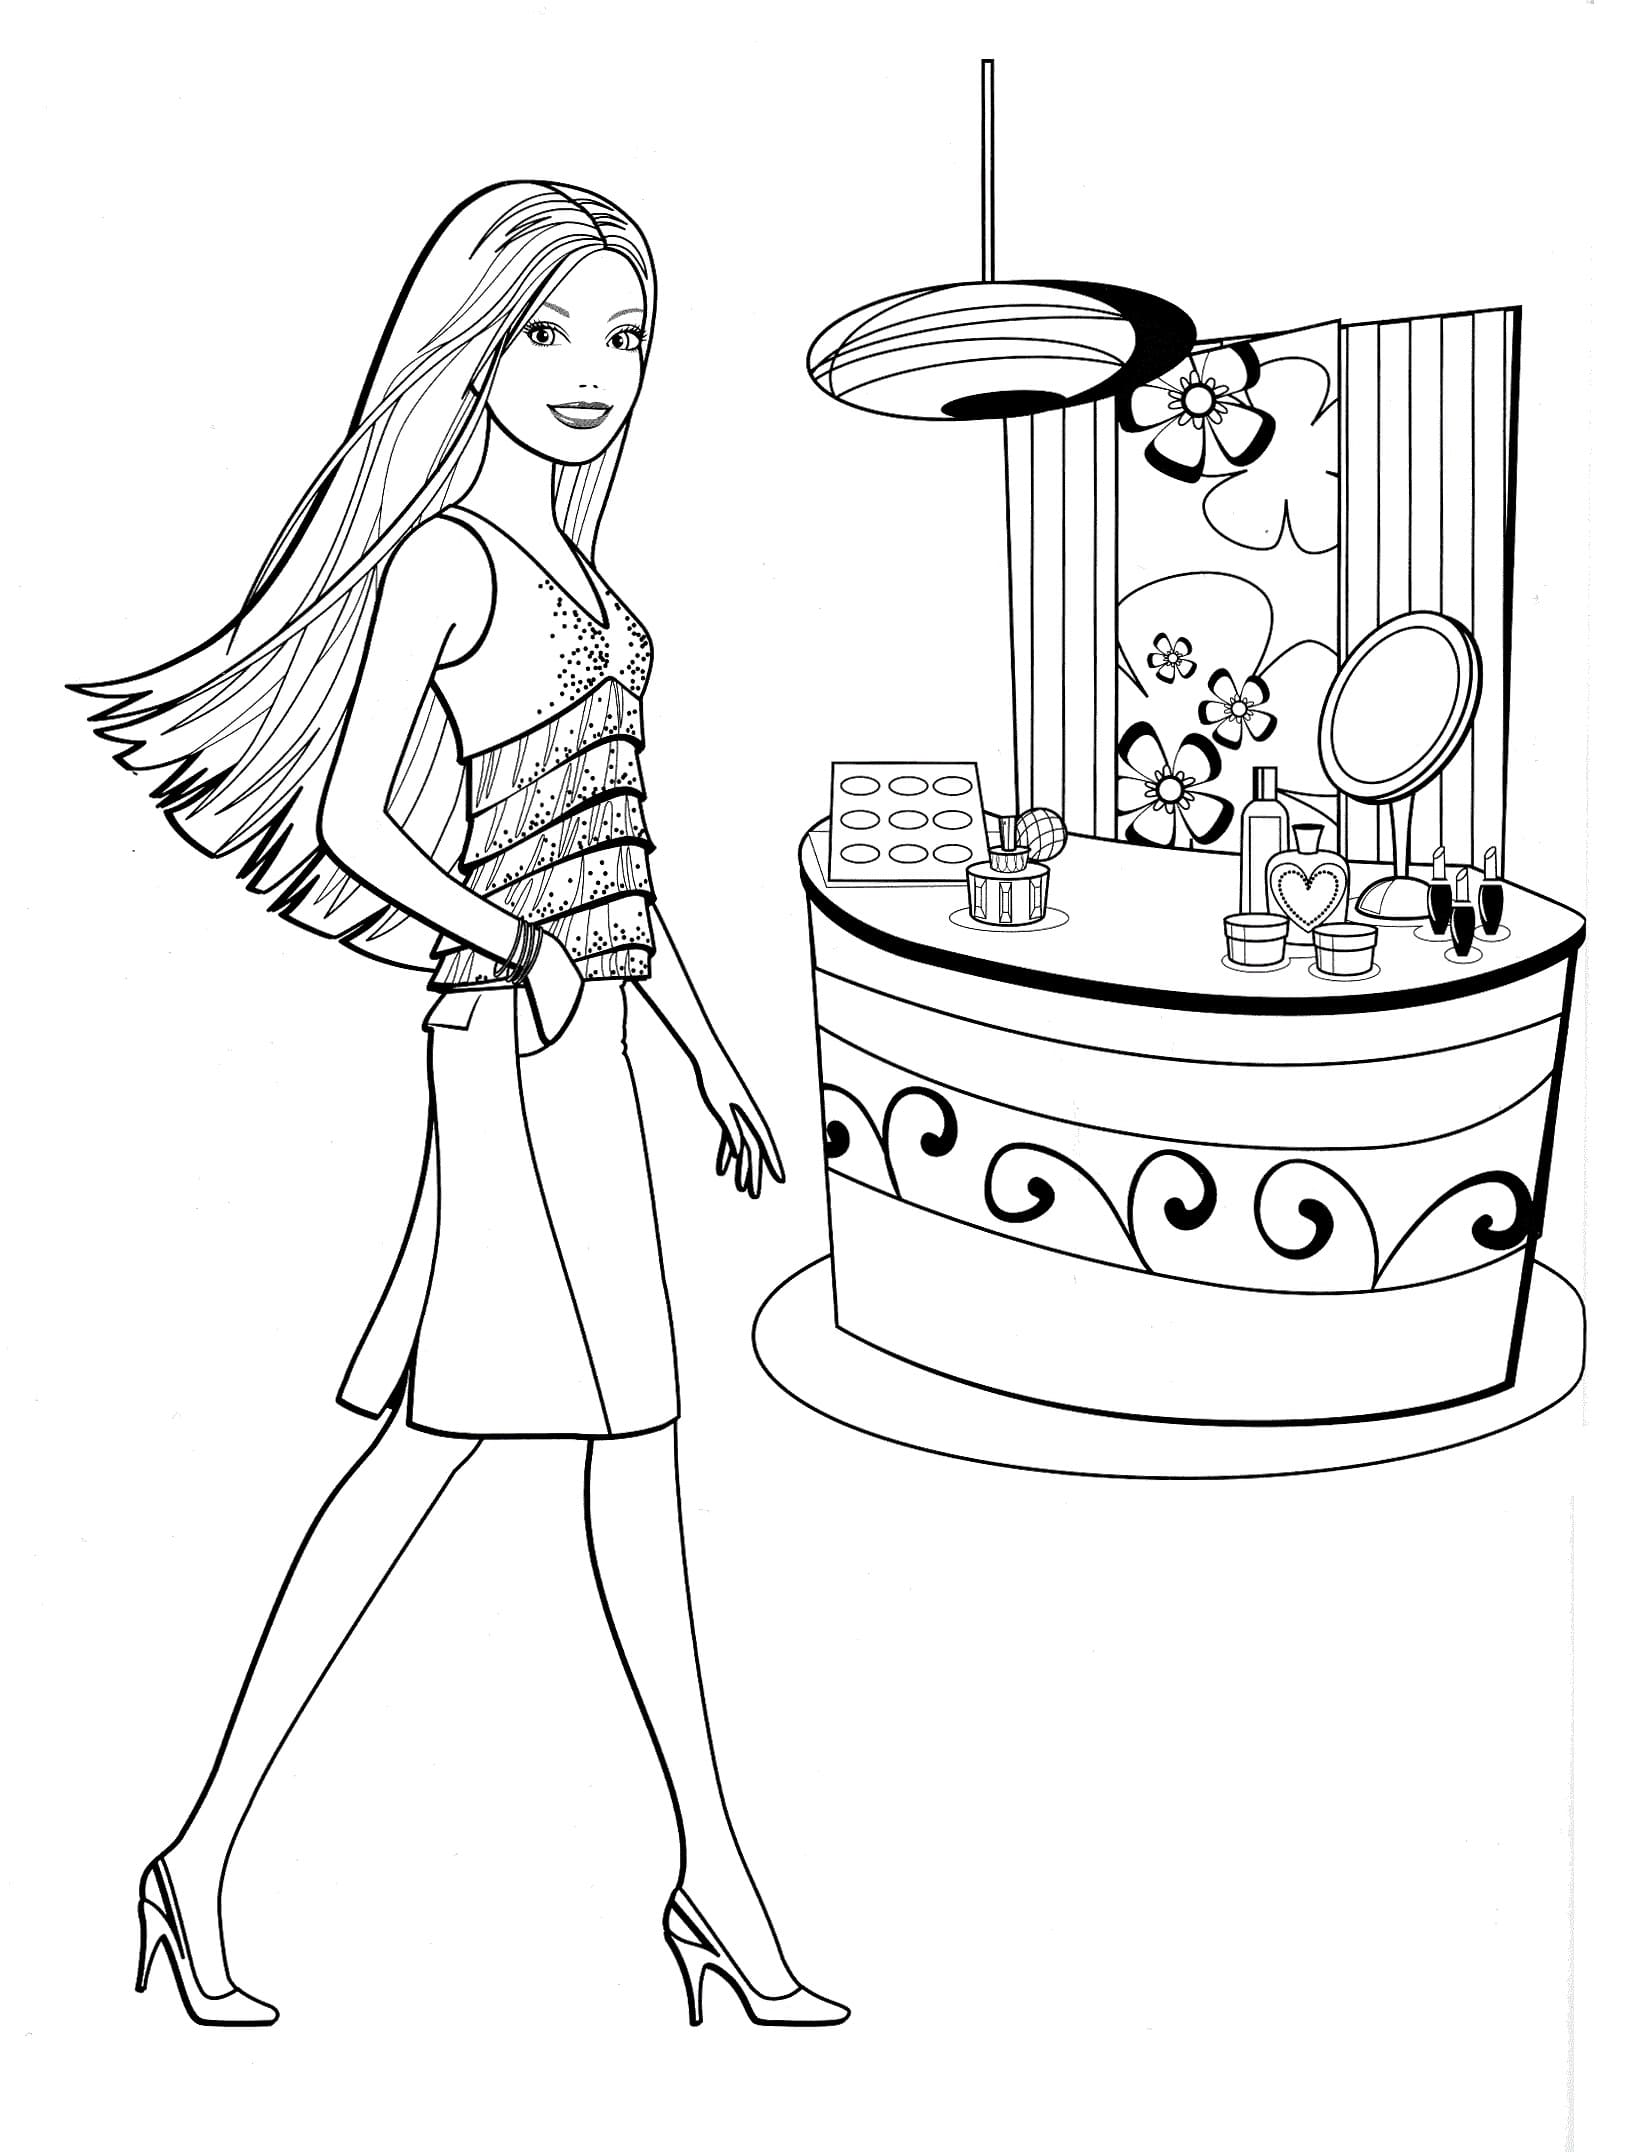 Download Barbie Coloring Pages. Print for Free. 100 Pictures